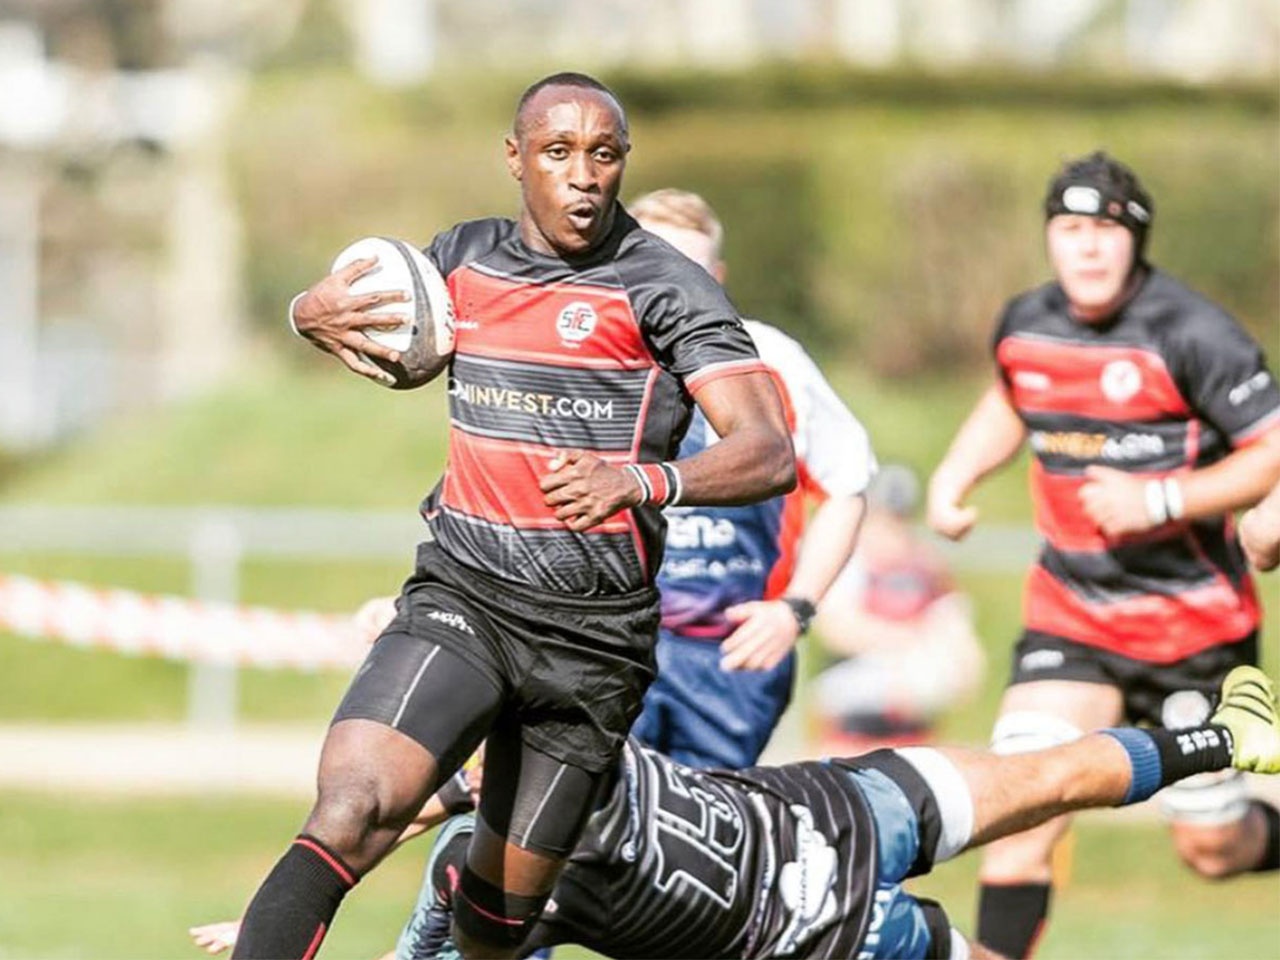 Rugby player Ian Minjire in action